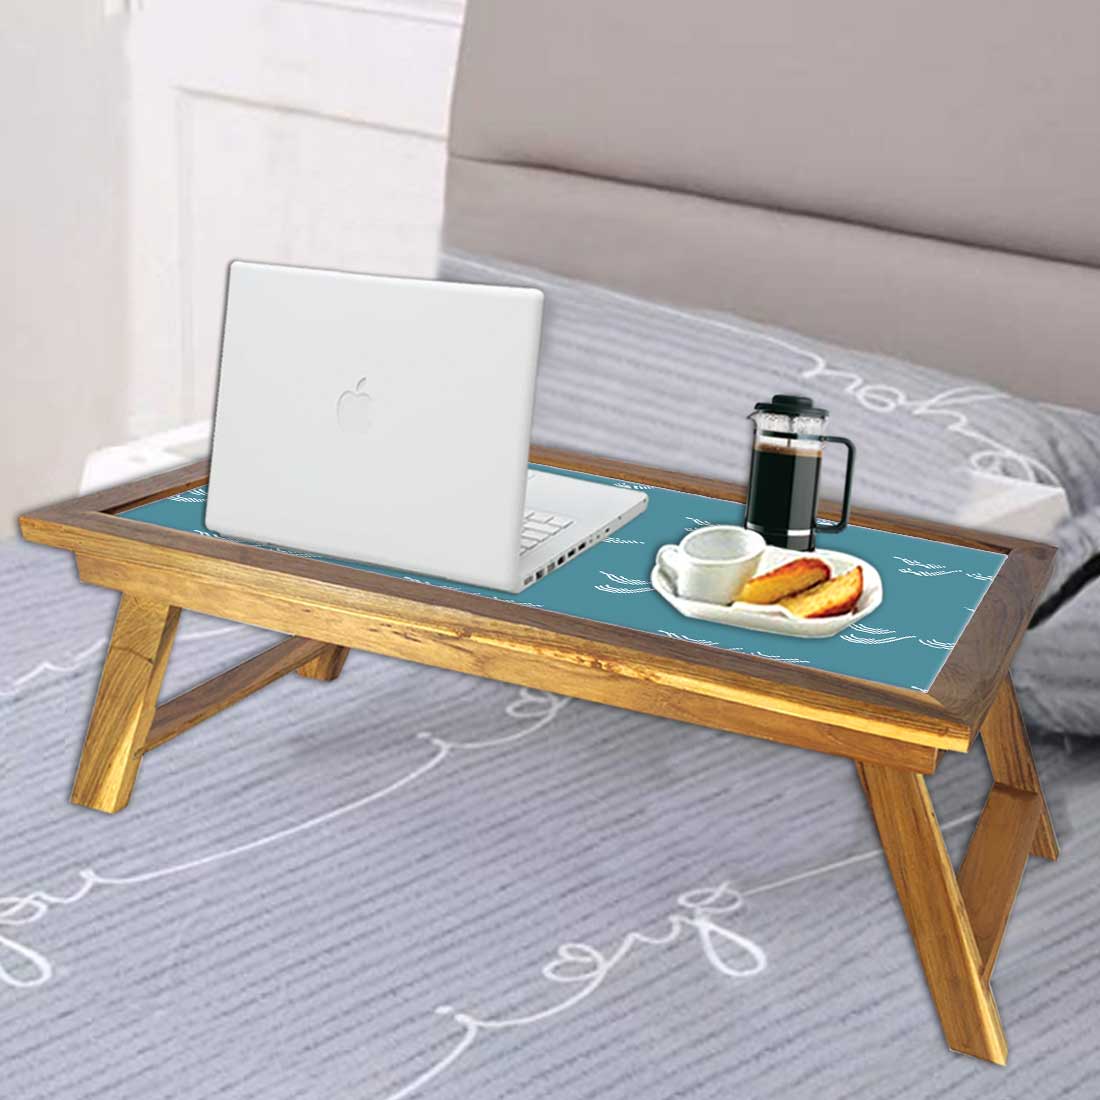 Nutcase Folding Laptop Table For Home Bed Lapdesk Breakfast Table Foldable Teak Wooden Study Desk - Shades of Teal Nutcase